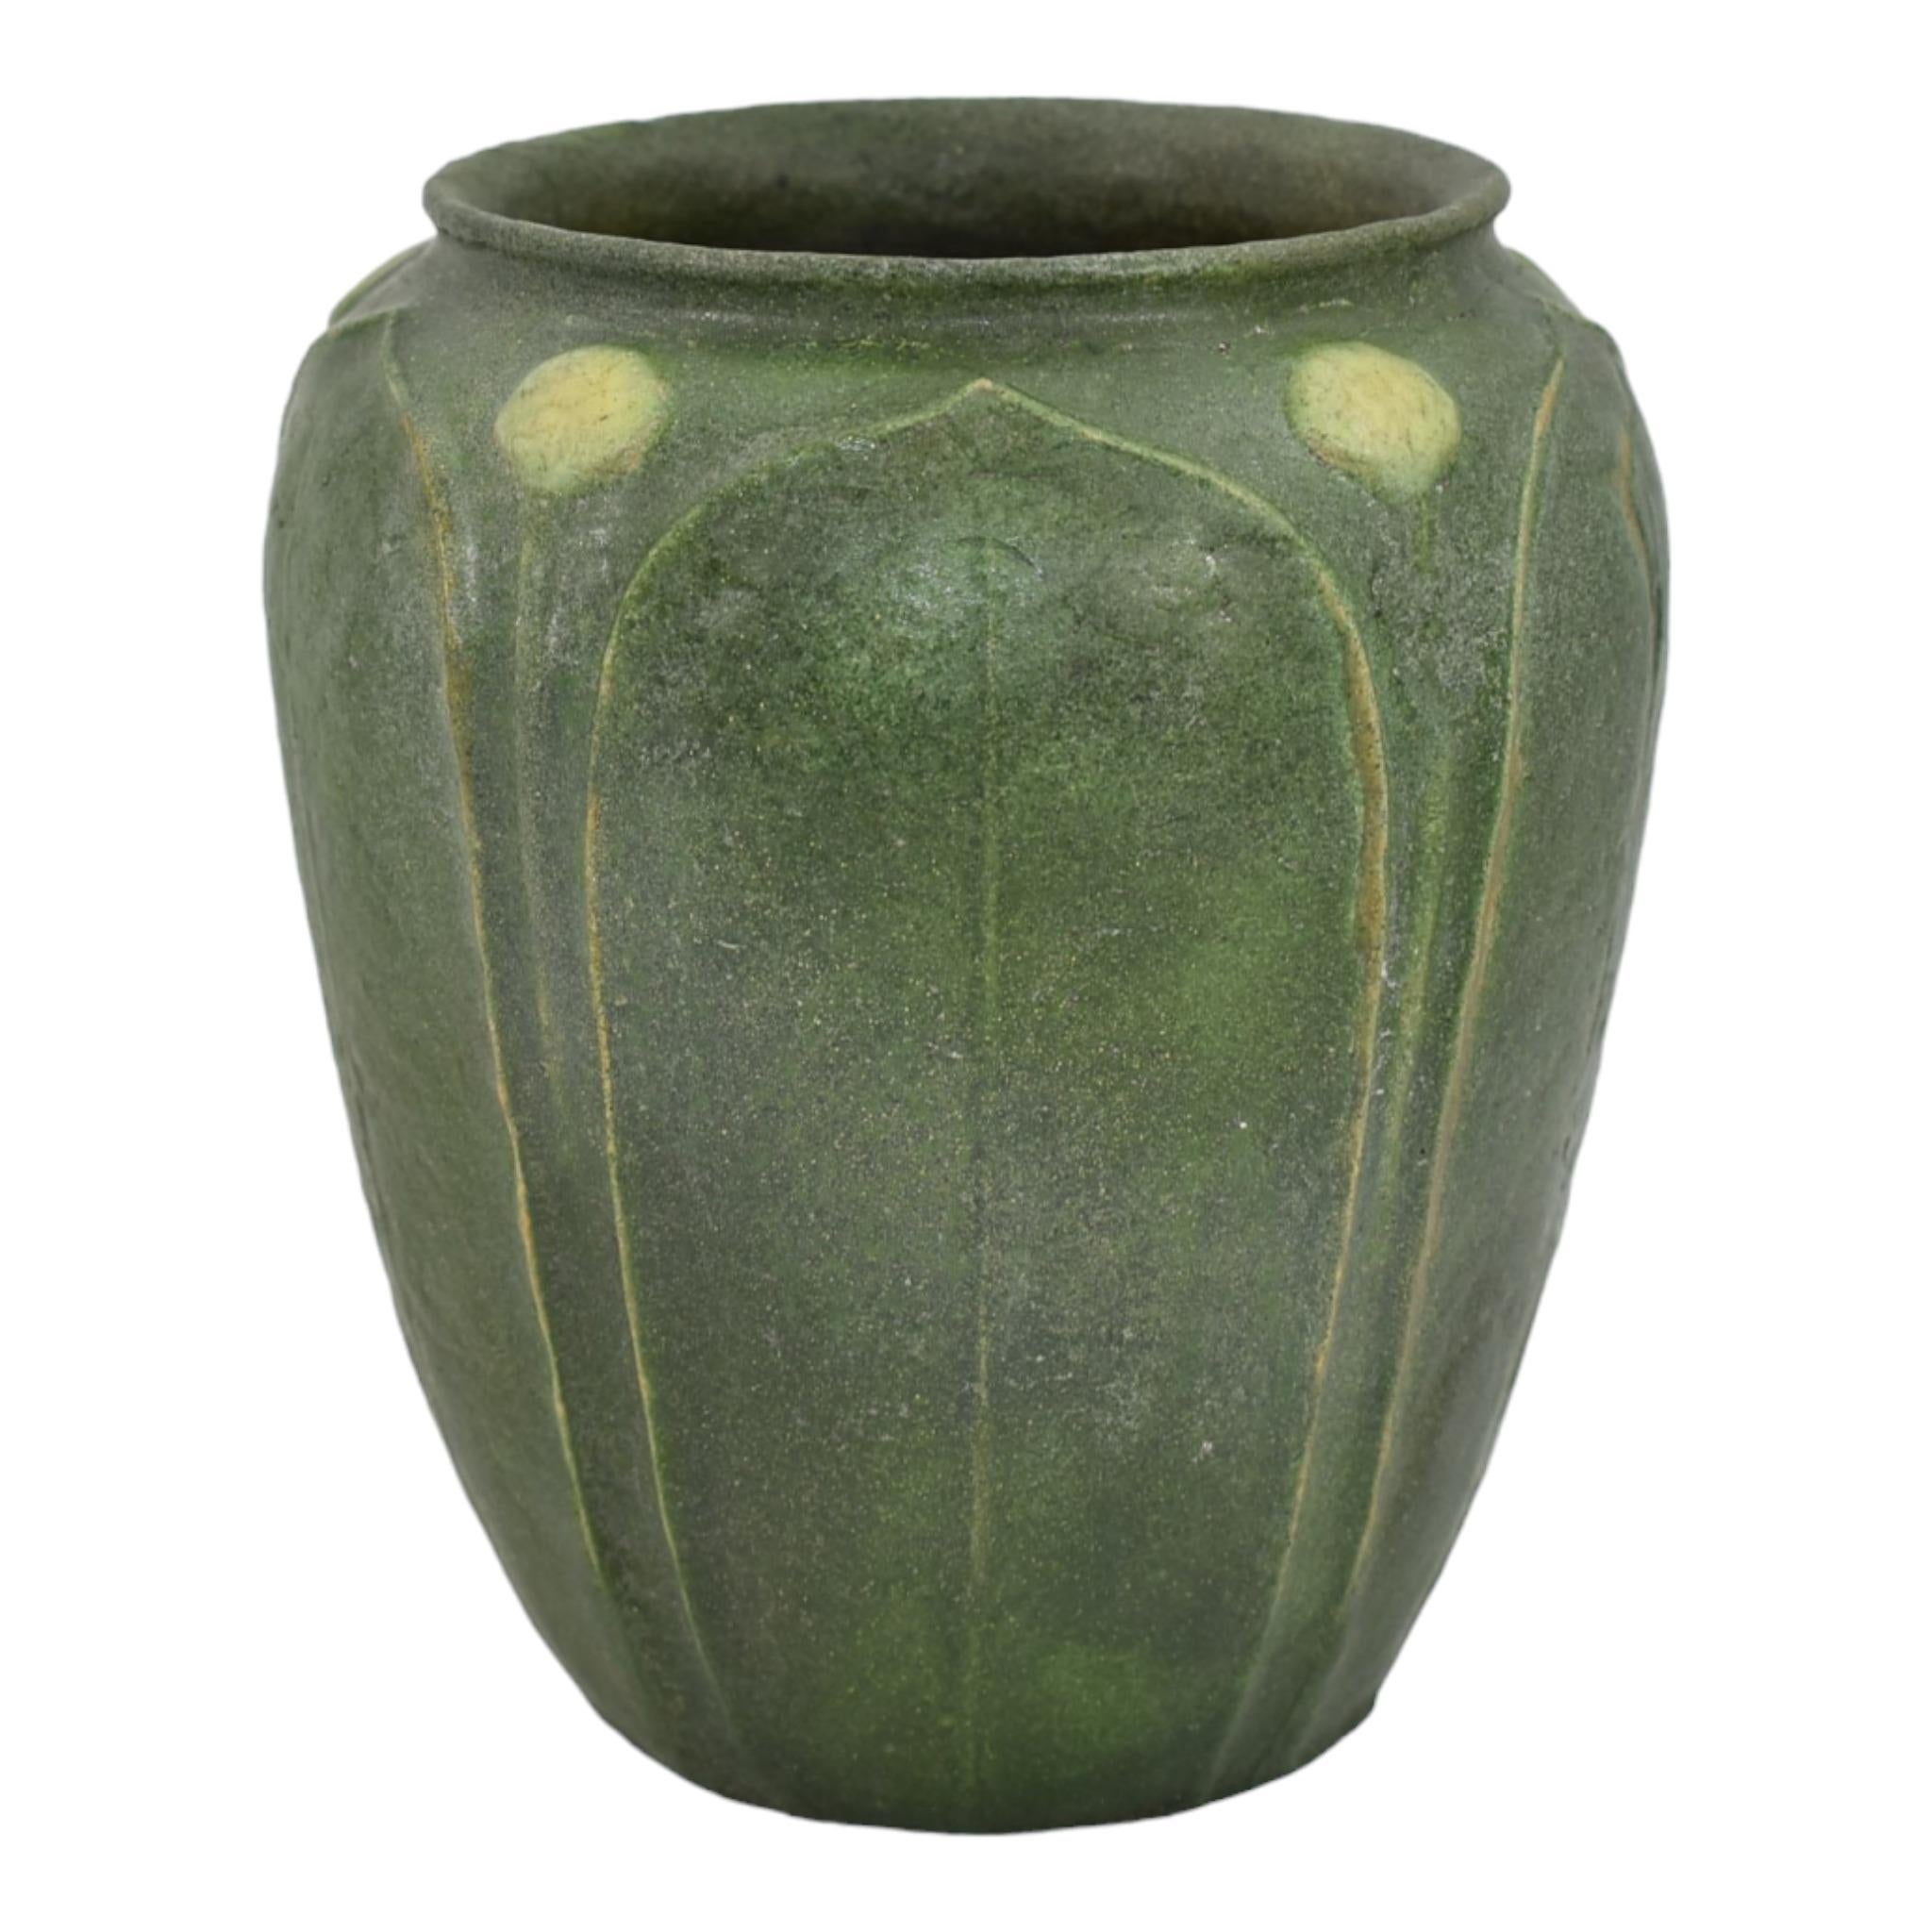 Grueby 1918 Arts and Crafts Pottery Matte Green Yellow Buds Two Color Vase
Wonderful organic matte green glaze with hand tooled broad leaves and yellow buds.
Shows well with a professional repair to the body. No other chips, cracks, damage or repair